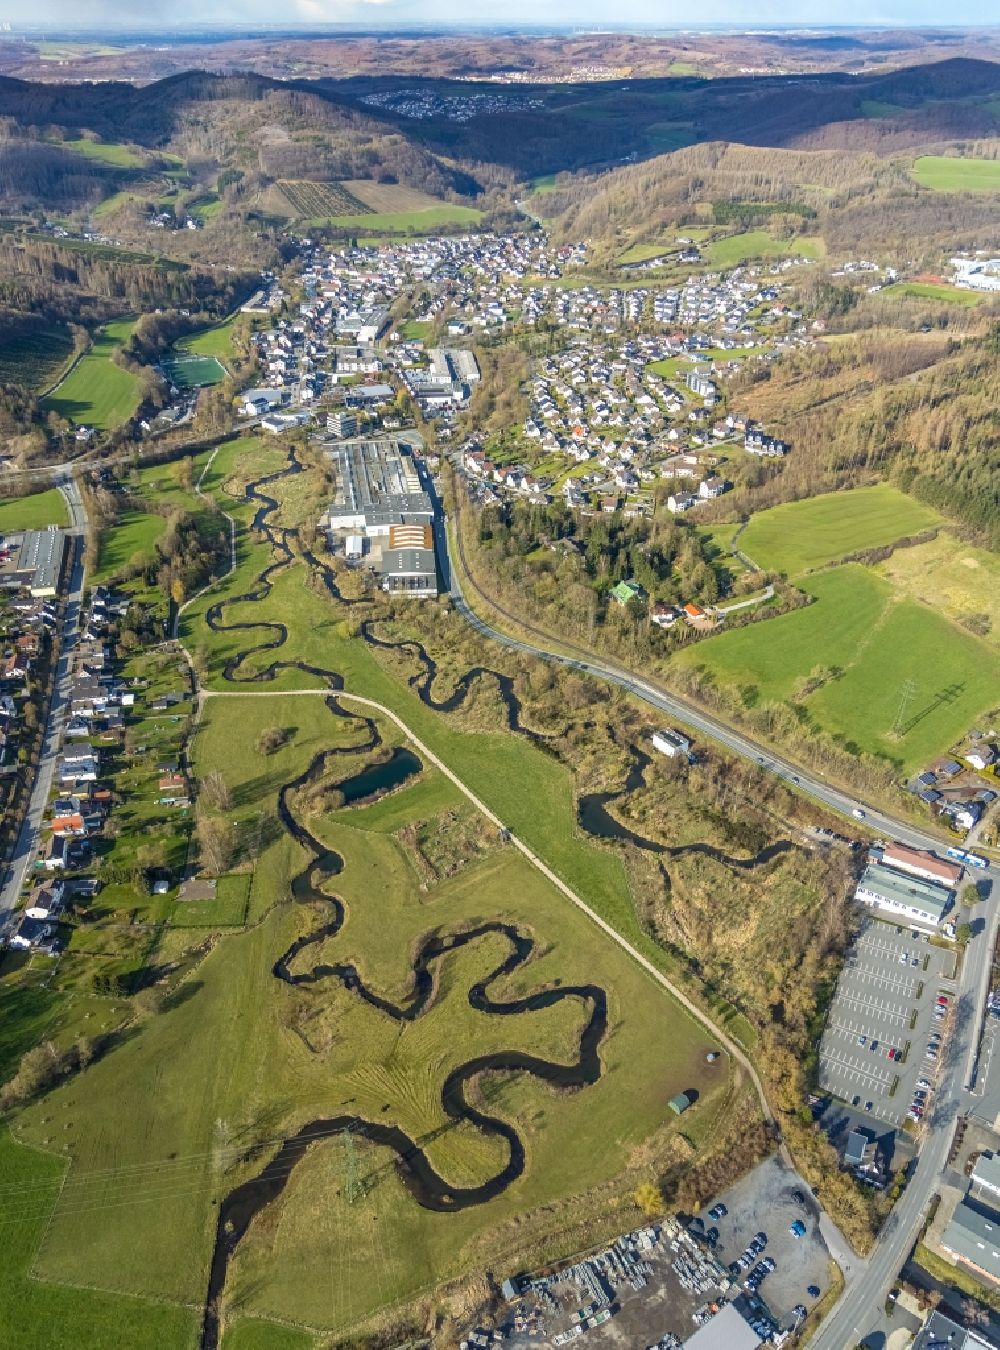 Aerial image Tiefenhagen - Meandering, serpentine curve of river Sorpe and Roehr in Tiefenhagen at Sauerland in the state North Rhine-Westphalia, Germany